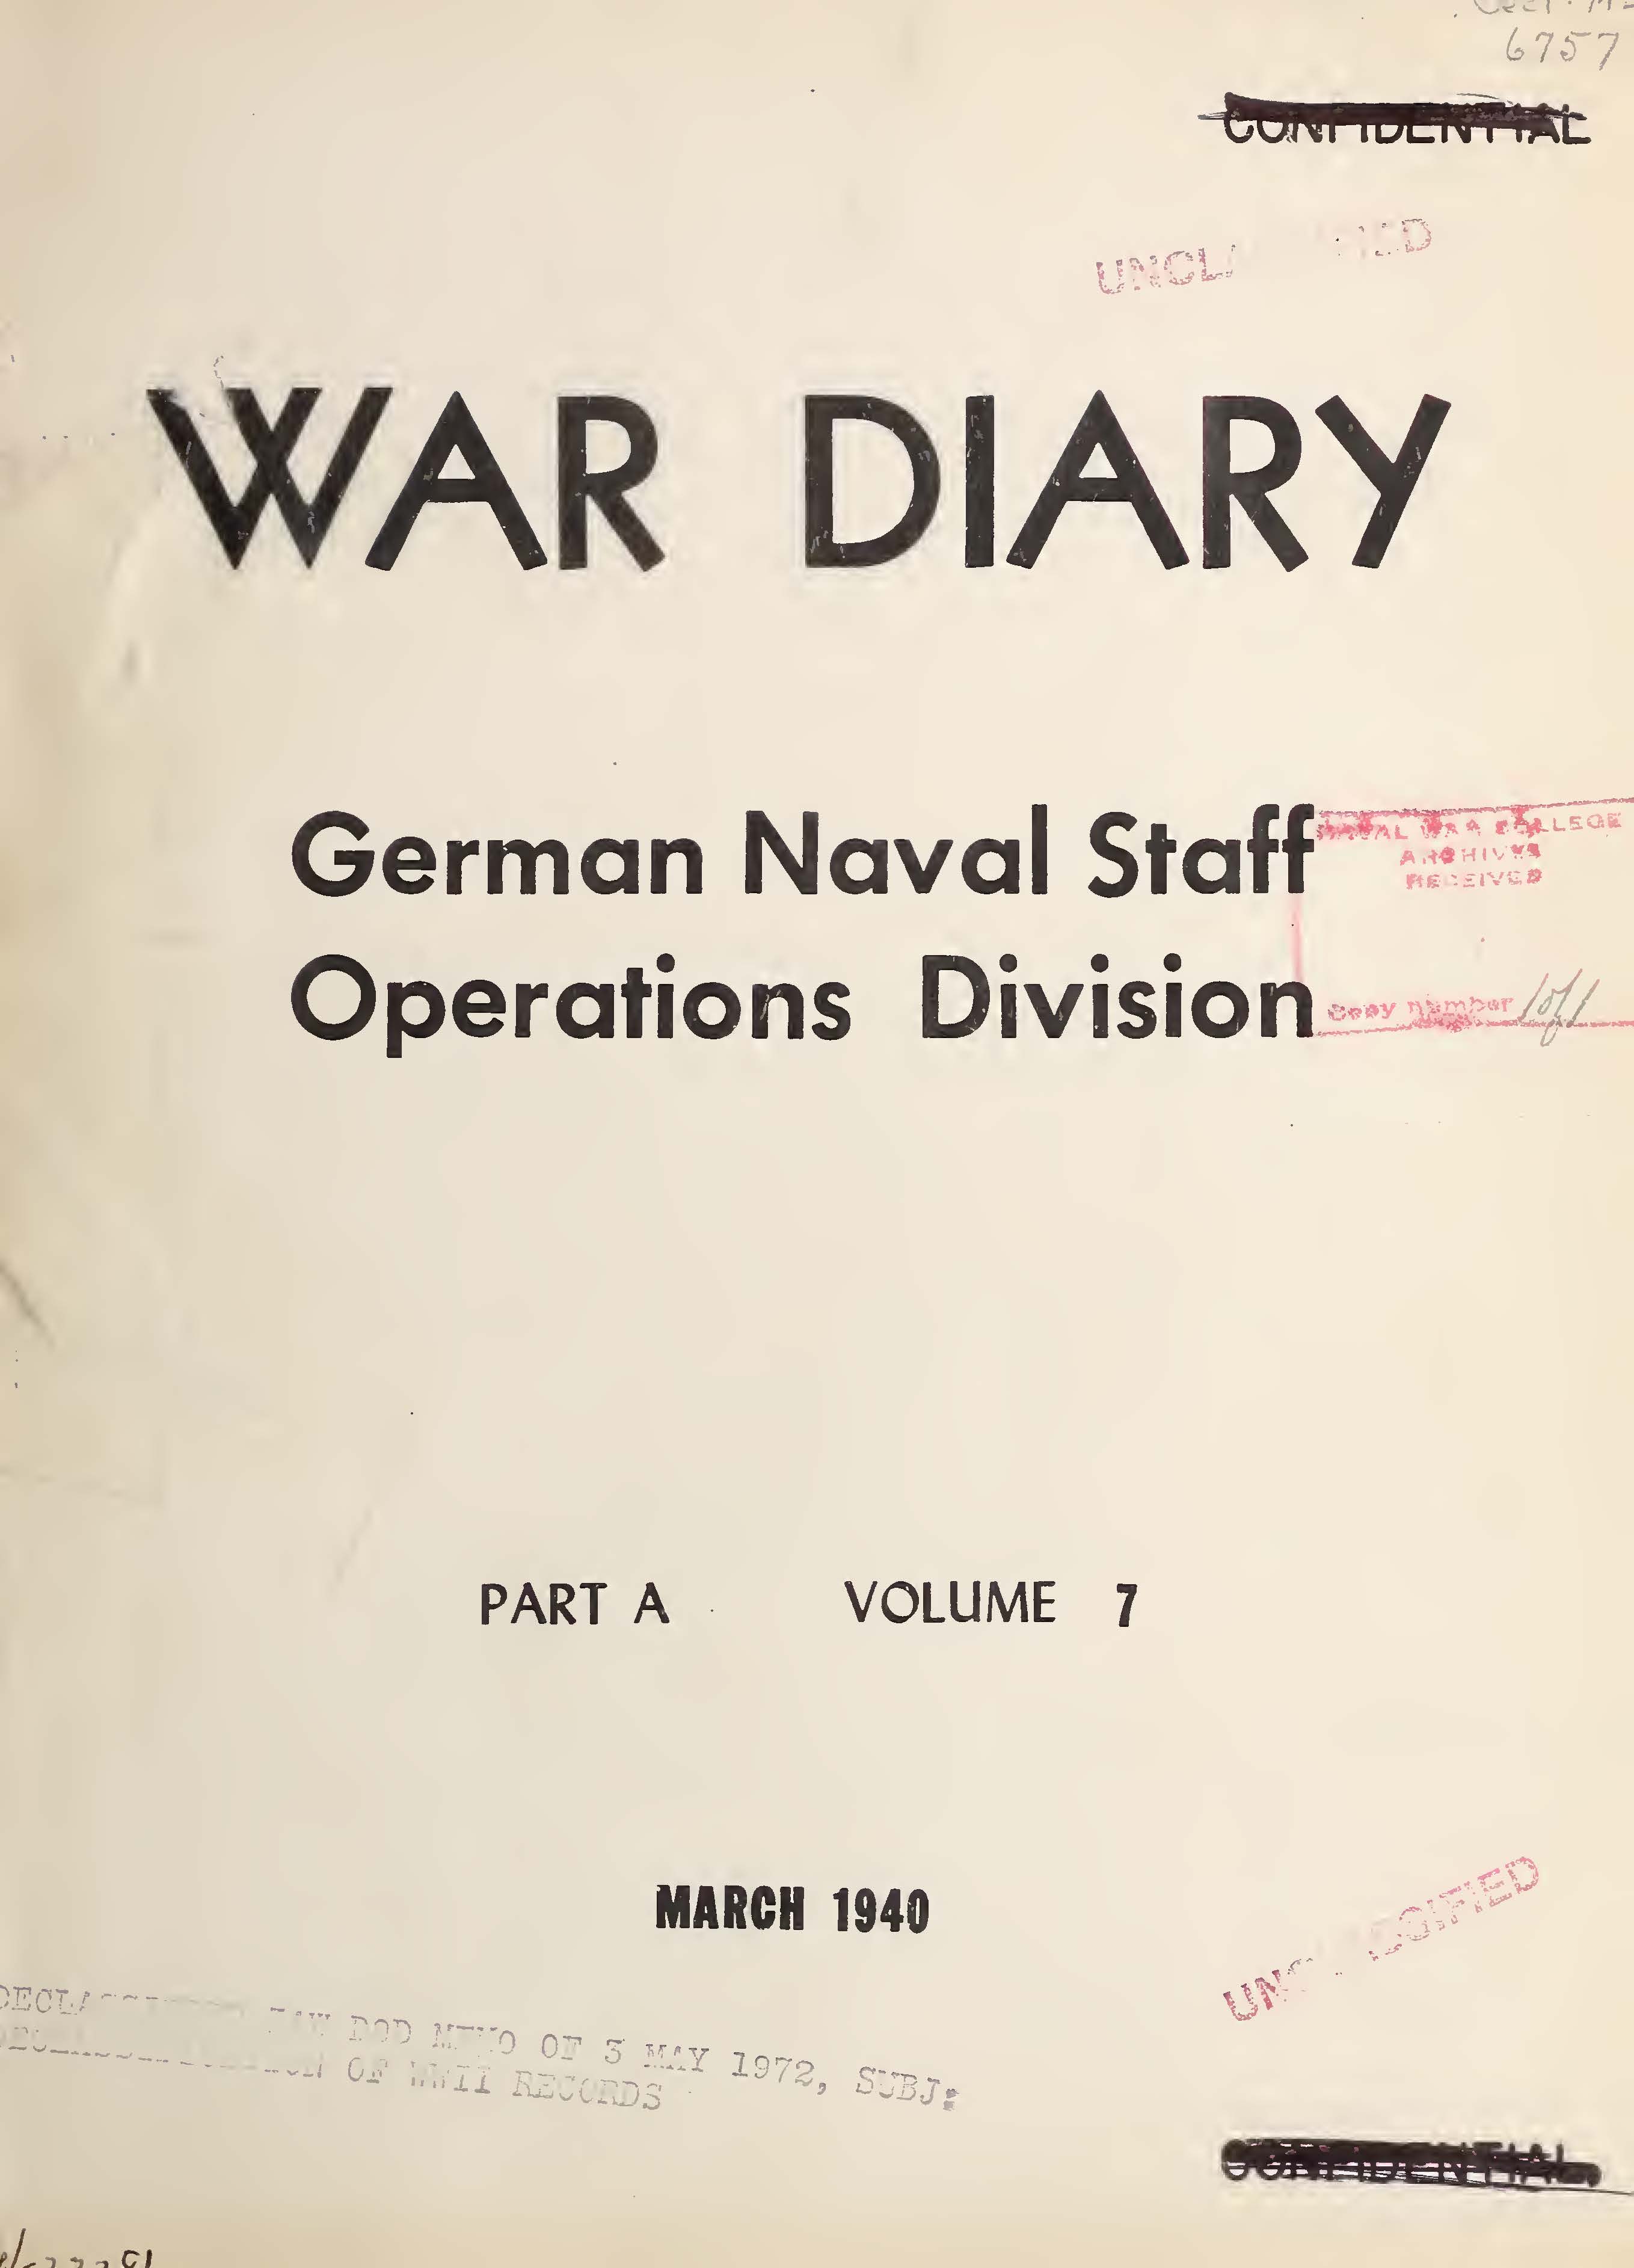 War Diary of the German Naval Staff (Operations Division) Part A, Volume 7, March 1940